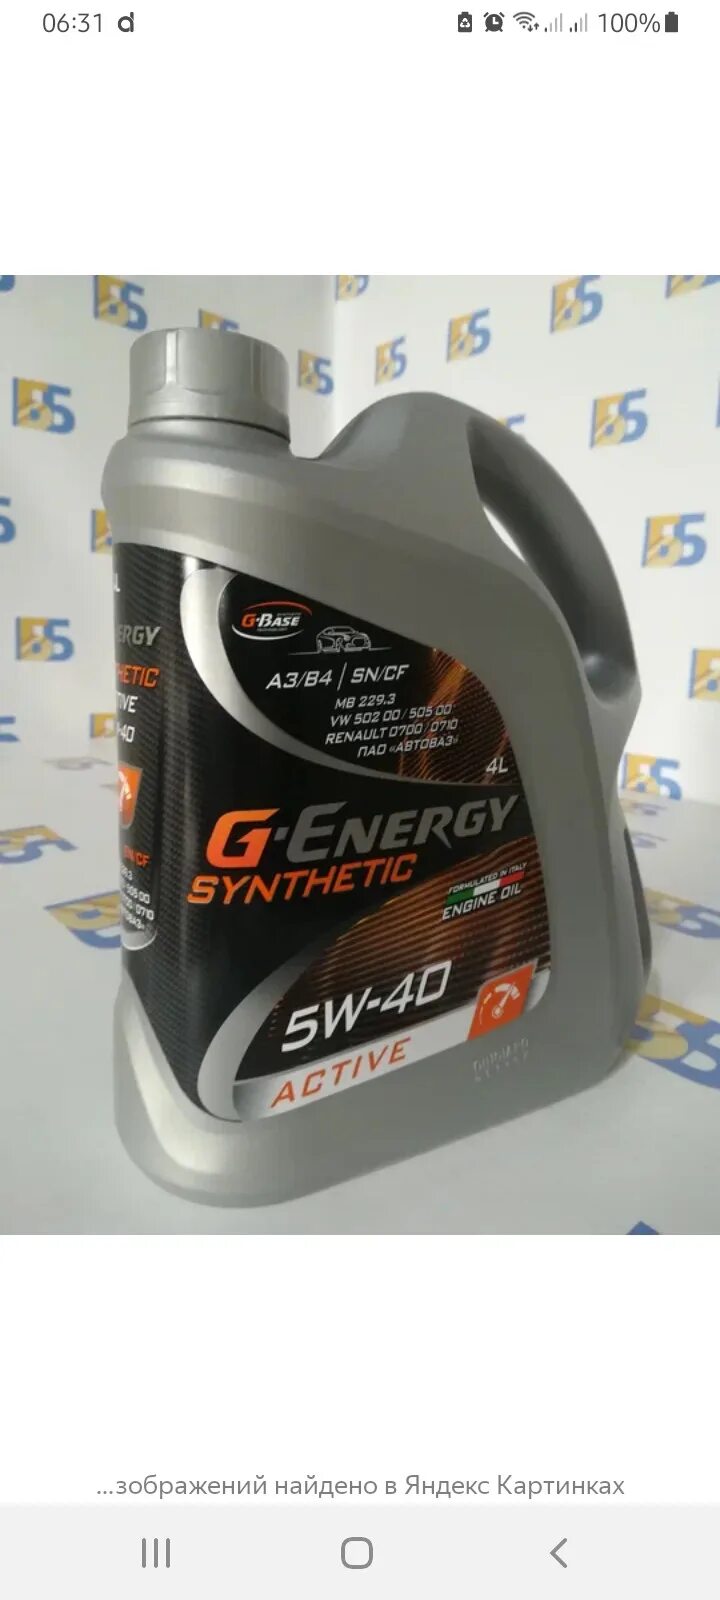 G Energy Synthetic 5w40. G-Energy Synthetic Active 5w-40. G-Energy Synthetic Active 5w40 4л. G Energy 5w40 синтетика Active. Масло energy 5 40